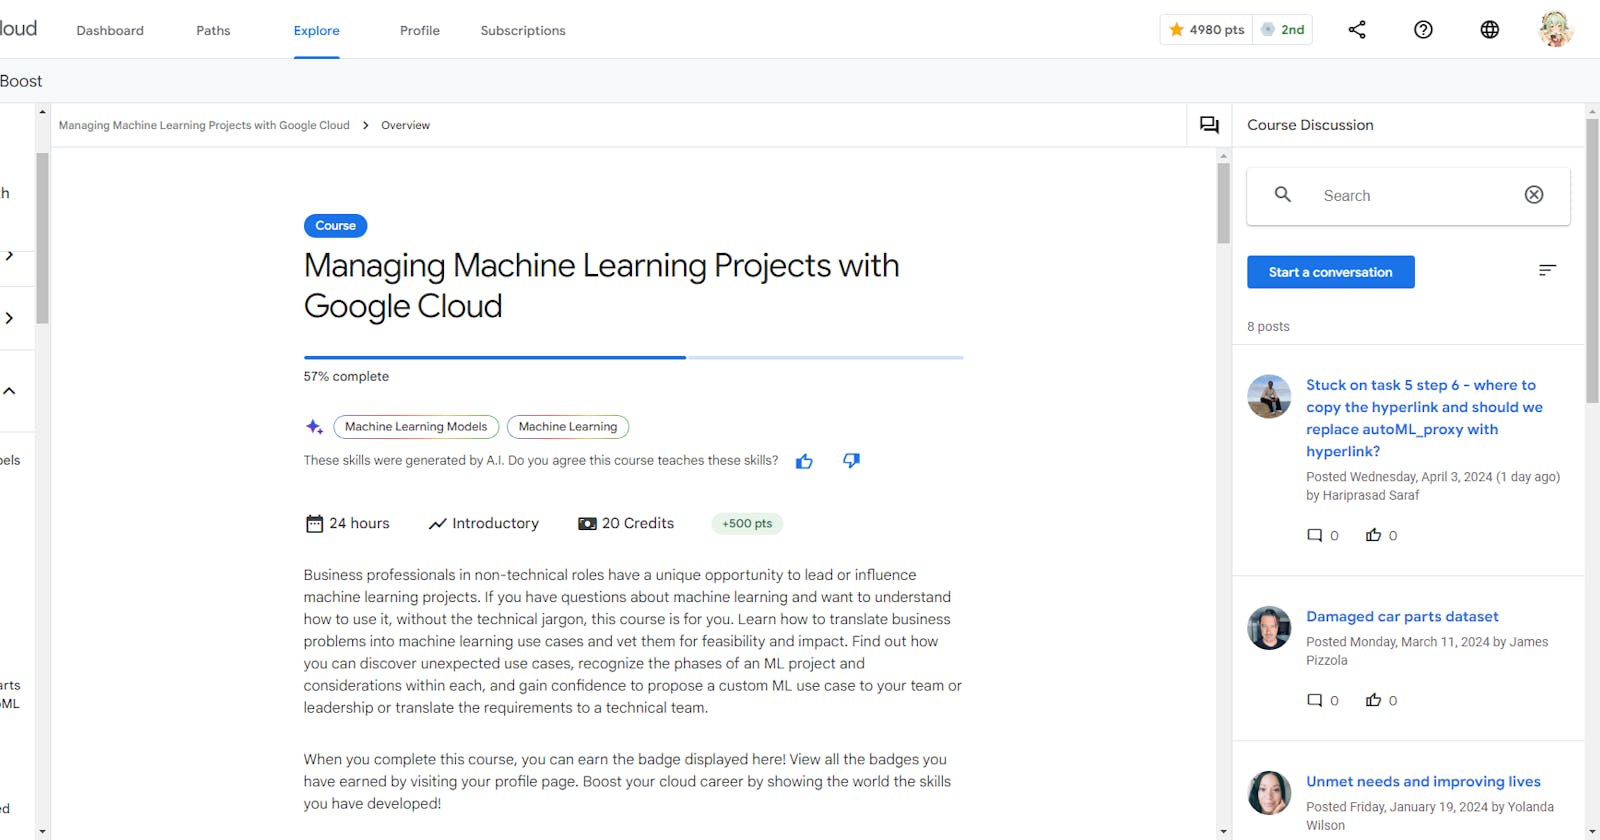 Managing Machine Learning Projects with Google Cloud - Quiz